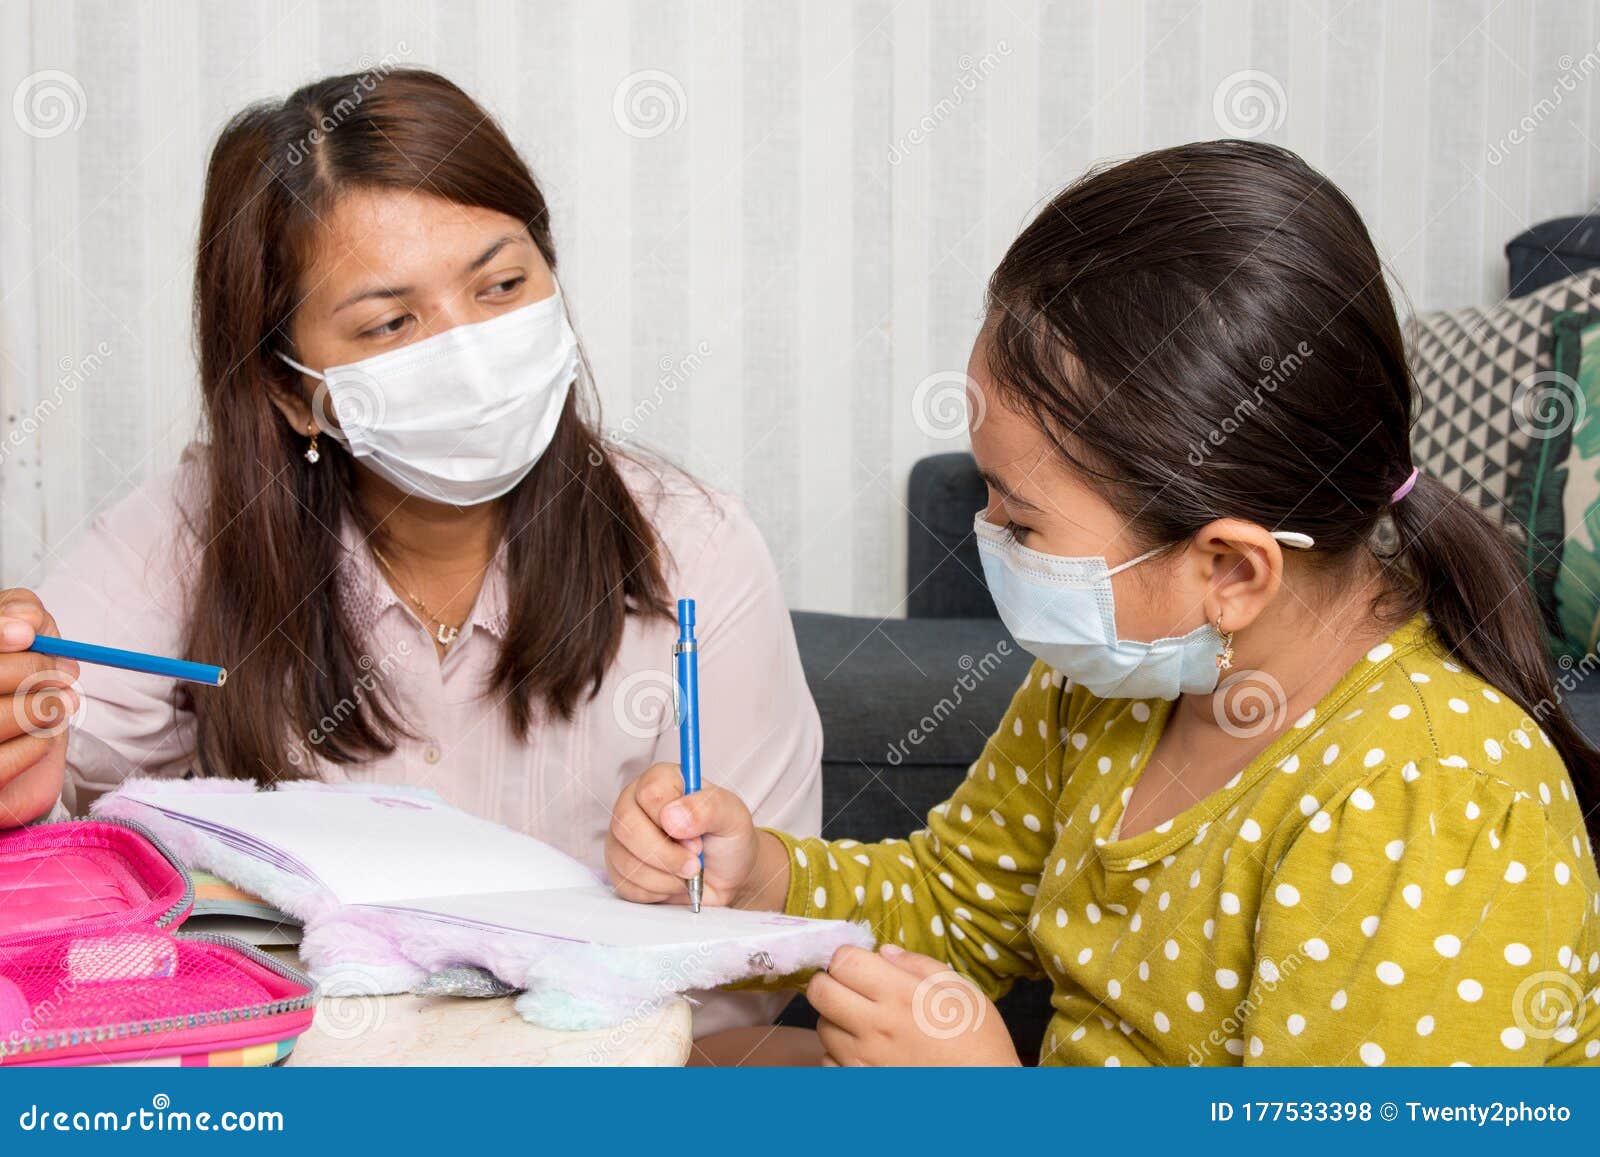 home schooling concept image with mother and daughter studying while wearing face masks because of current corona virus threat